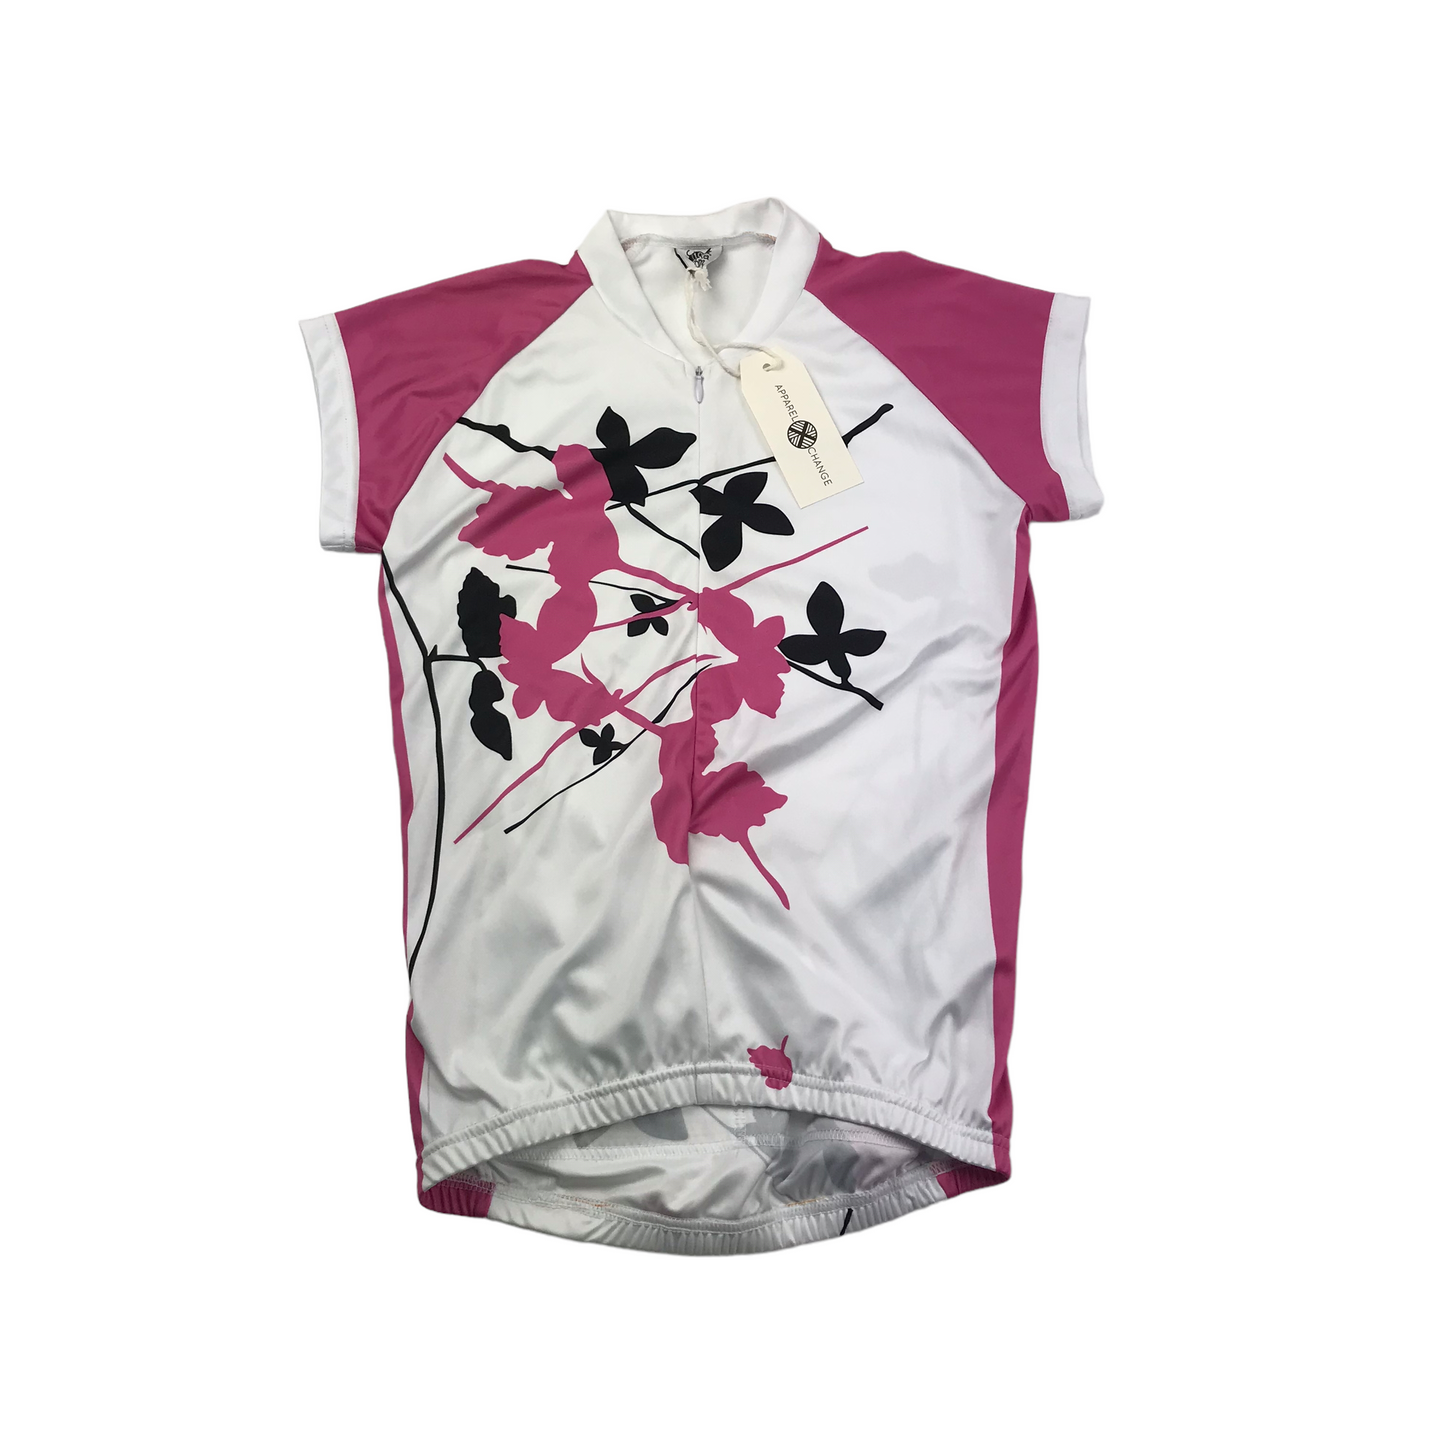 Foska White and Pink Short Sleeve Cycling Sports Top Women's Size 10